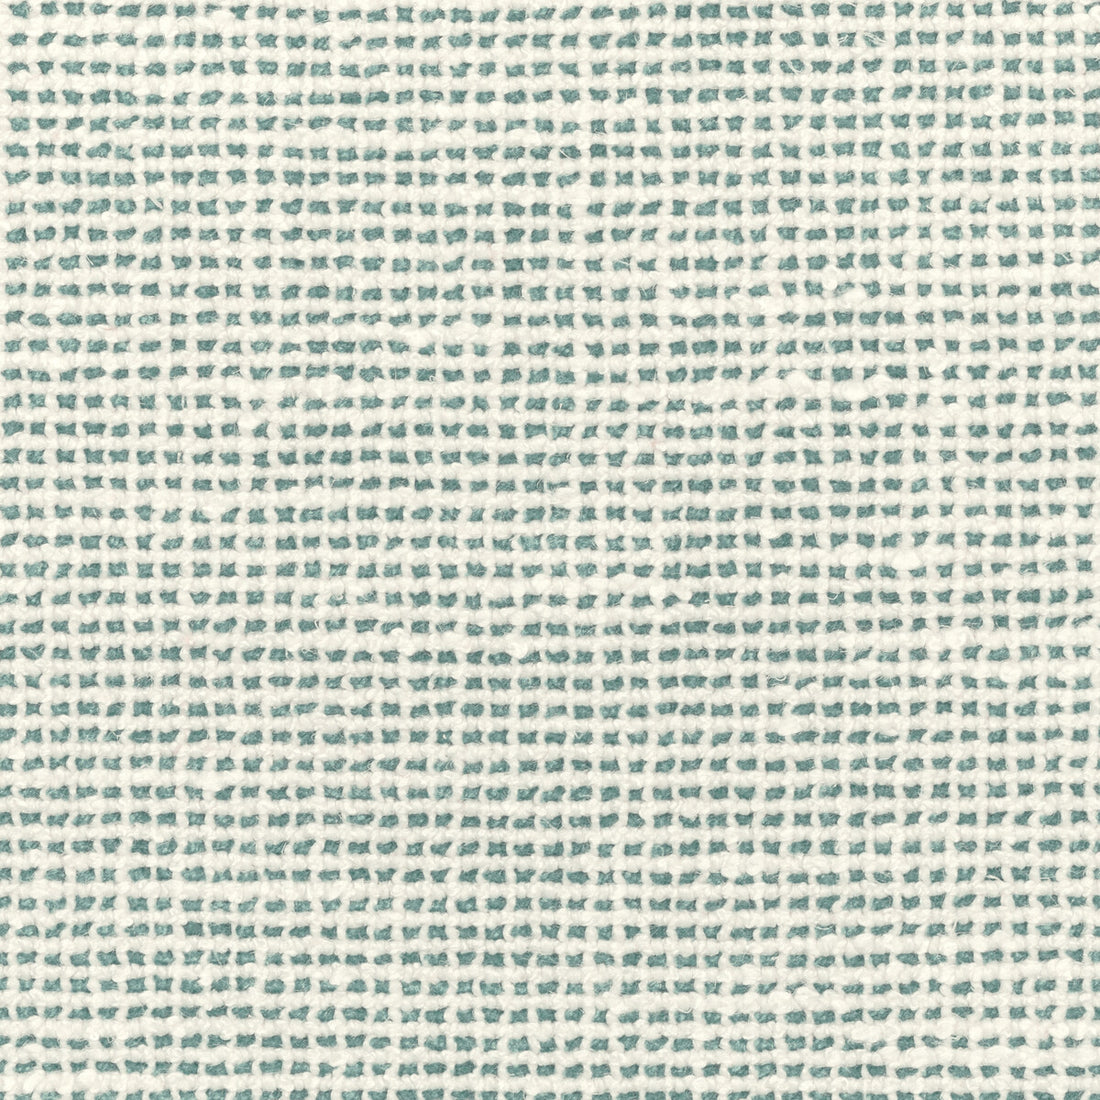 Skiffle fabric in soft aqua color - pattern 34449.113.0 - by Kravet Couture in the Luxury Textures II collection